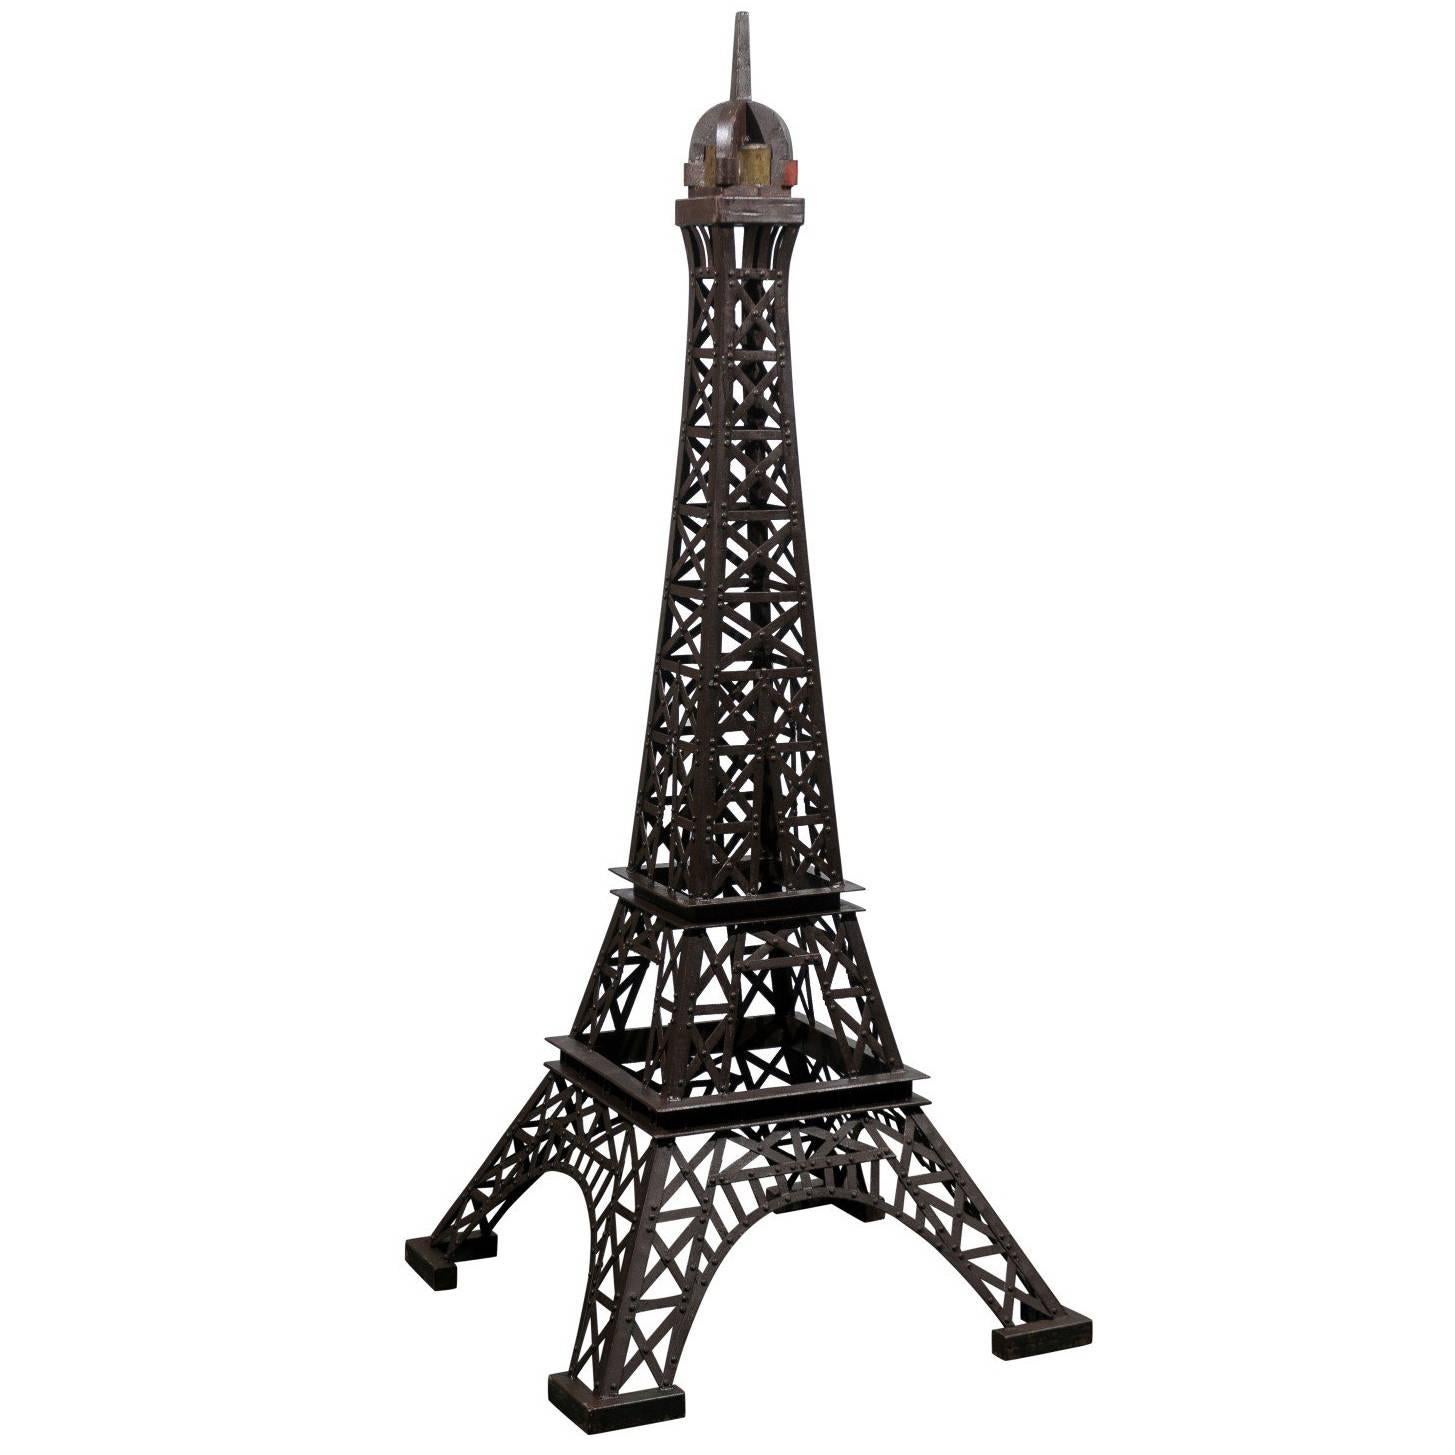 6.5 Ft. Tall Heavy Iron Statue Replica of the Eiffel Tower, Recycle Vintage Iron